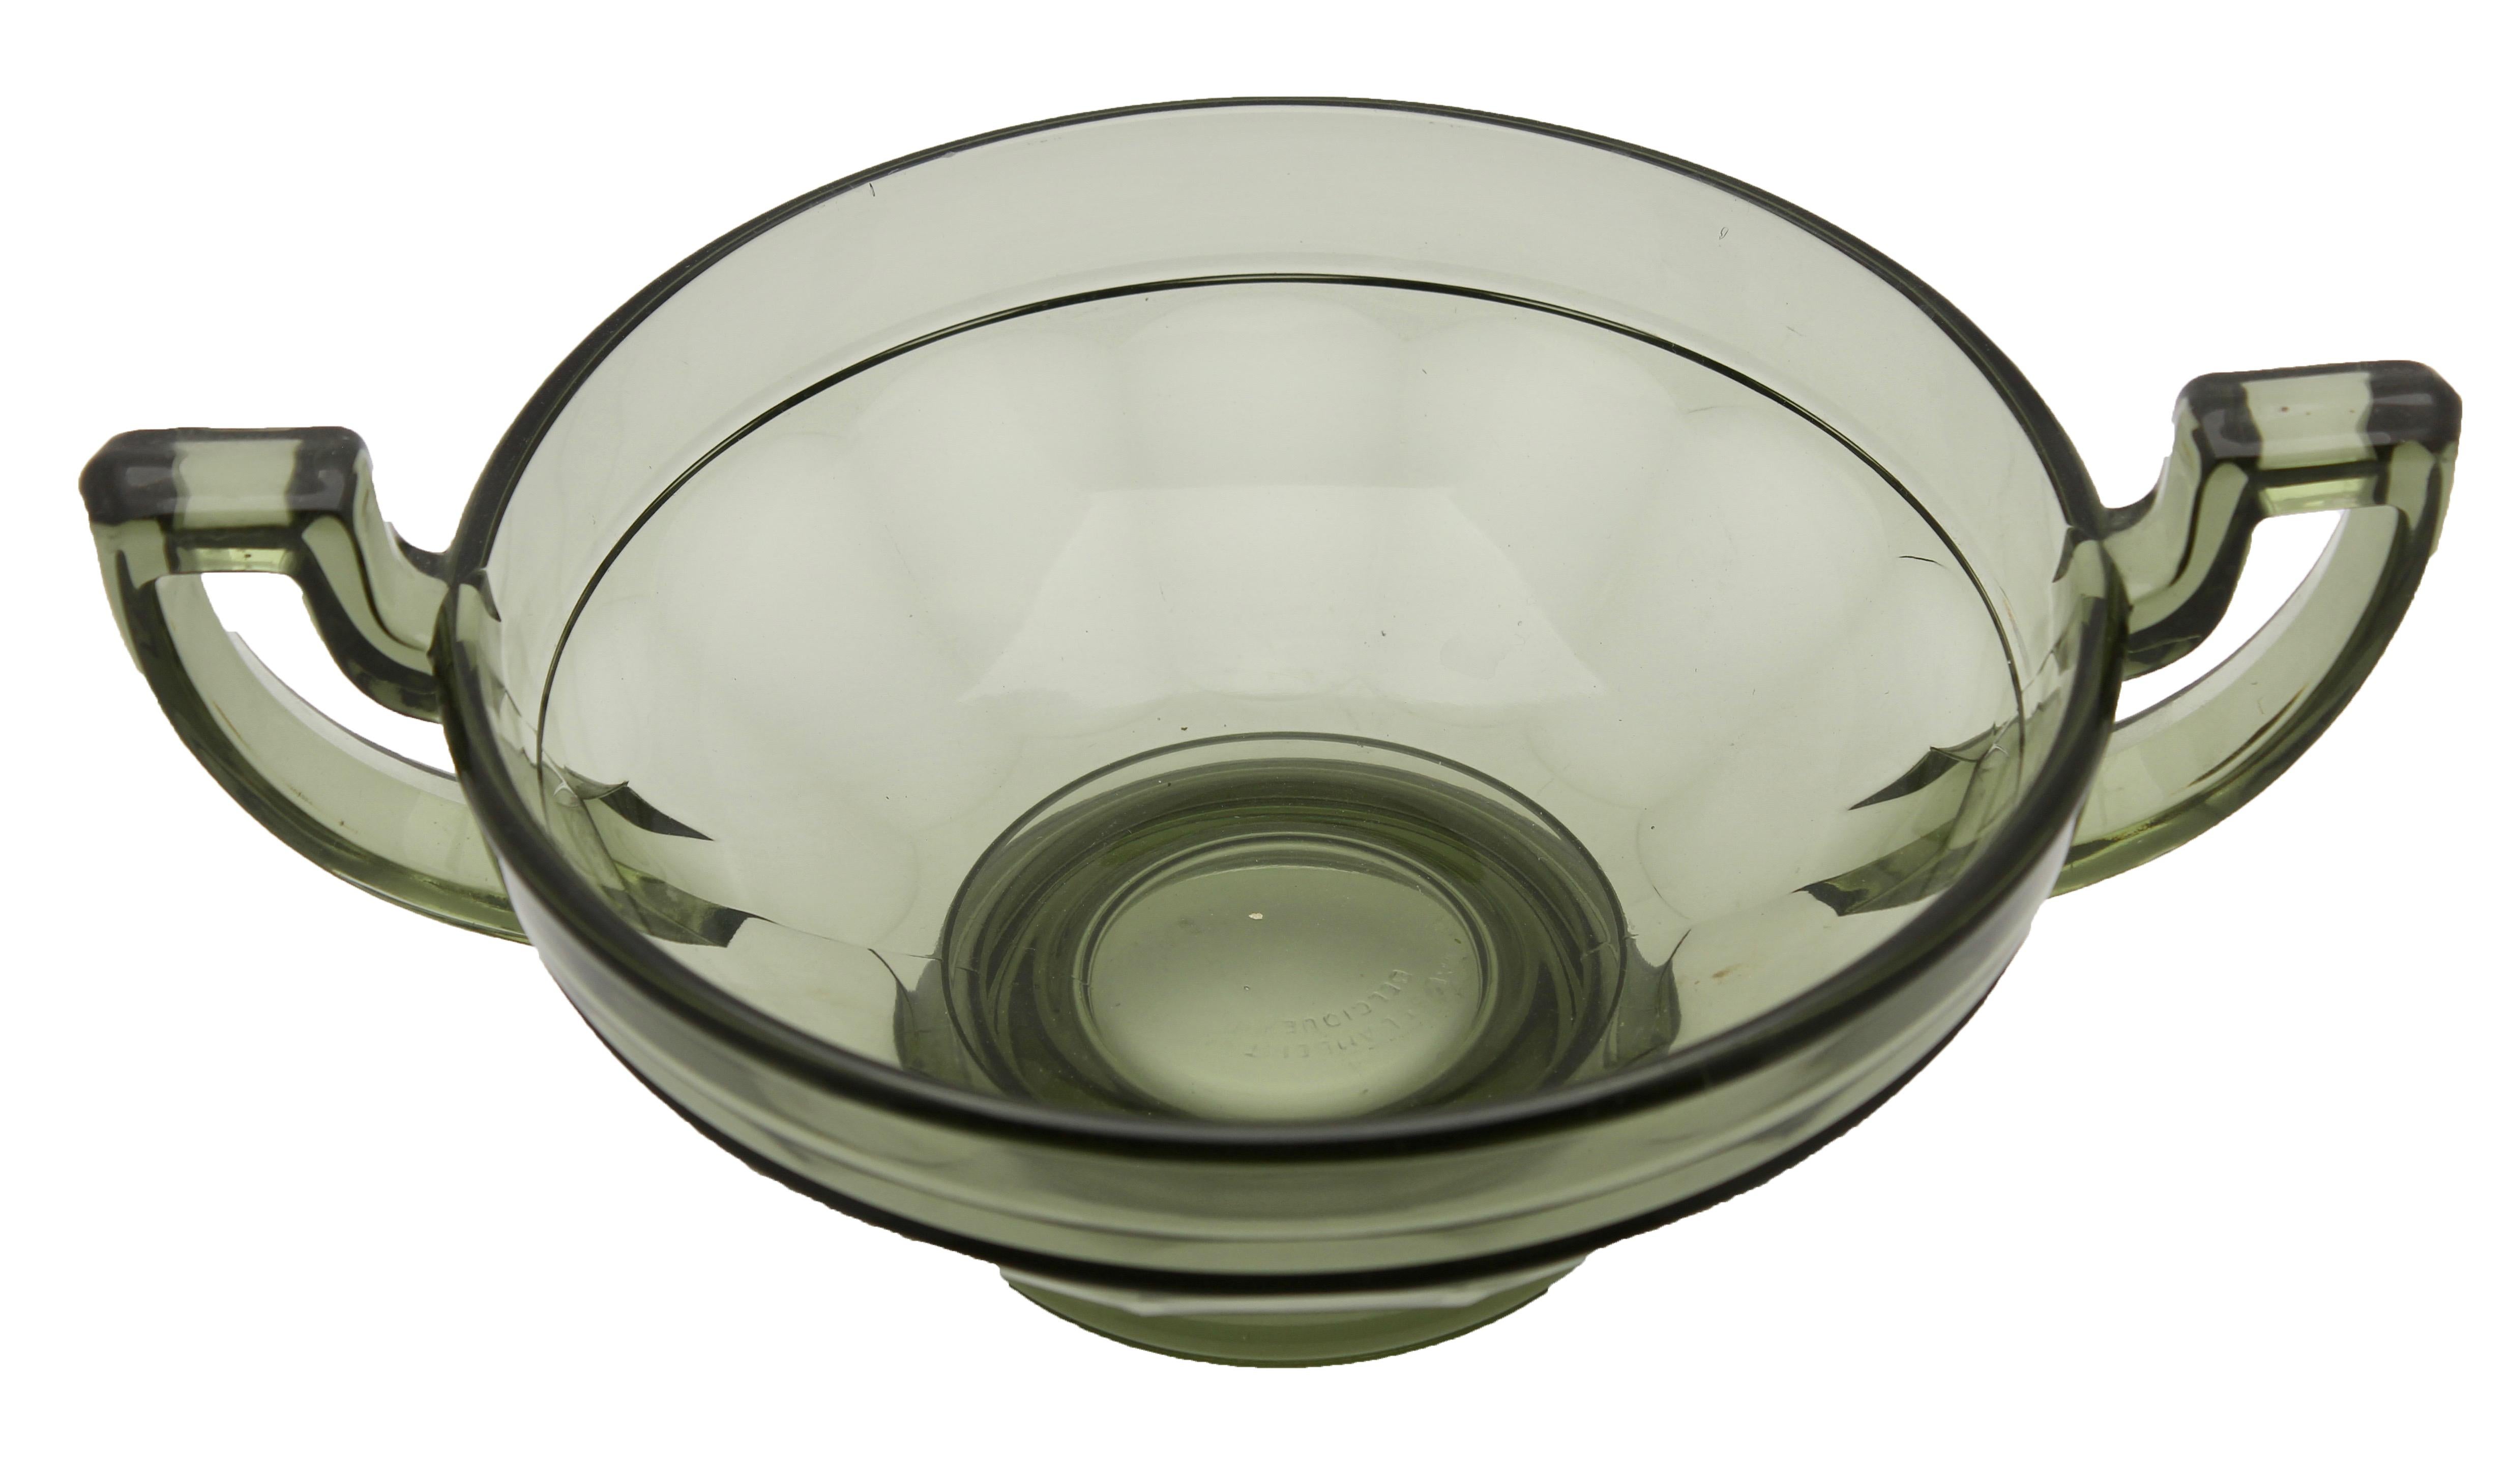 The circular version of this bowl design in amber glass, made by Val Saint Lambert for their Luxval series. The vase is marked on the inside: 